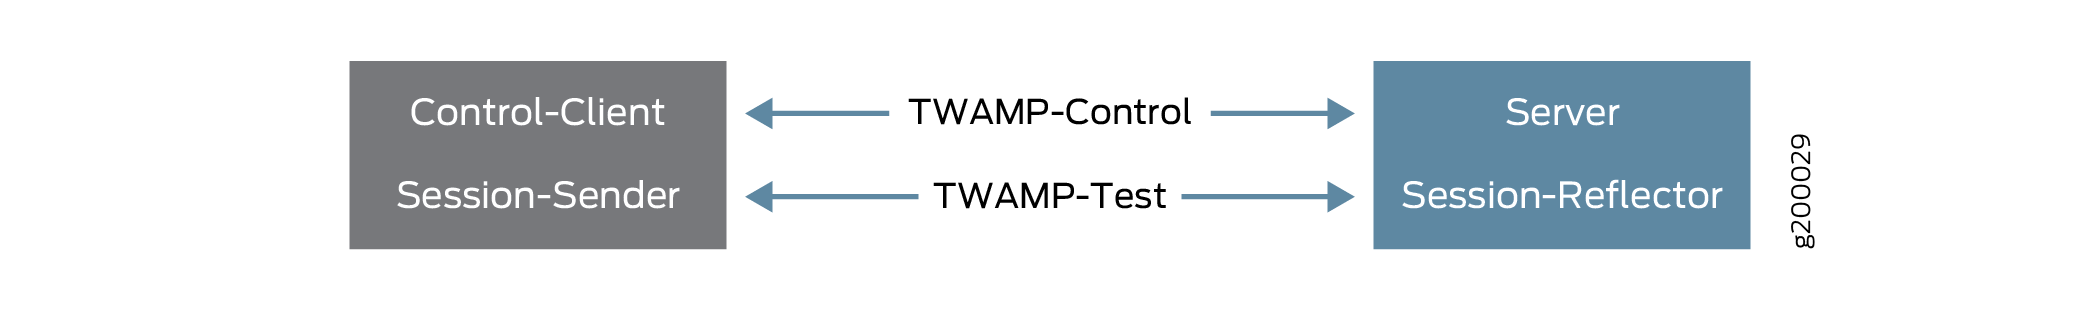 The Elements of TWAMP Implemented as Client (Left) and Server (Right).